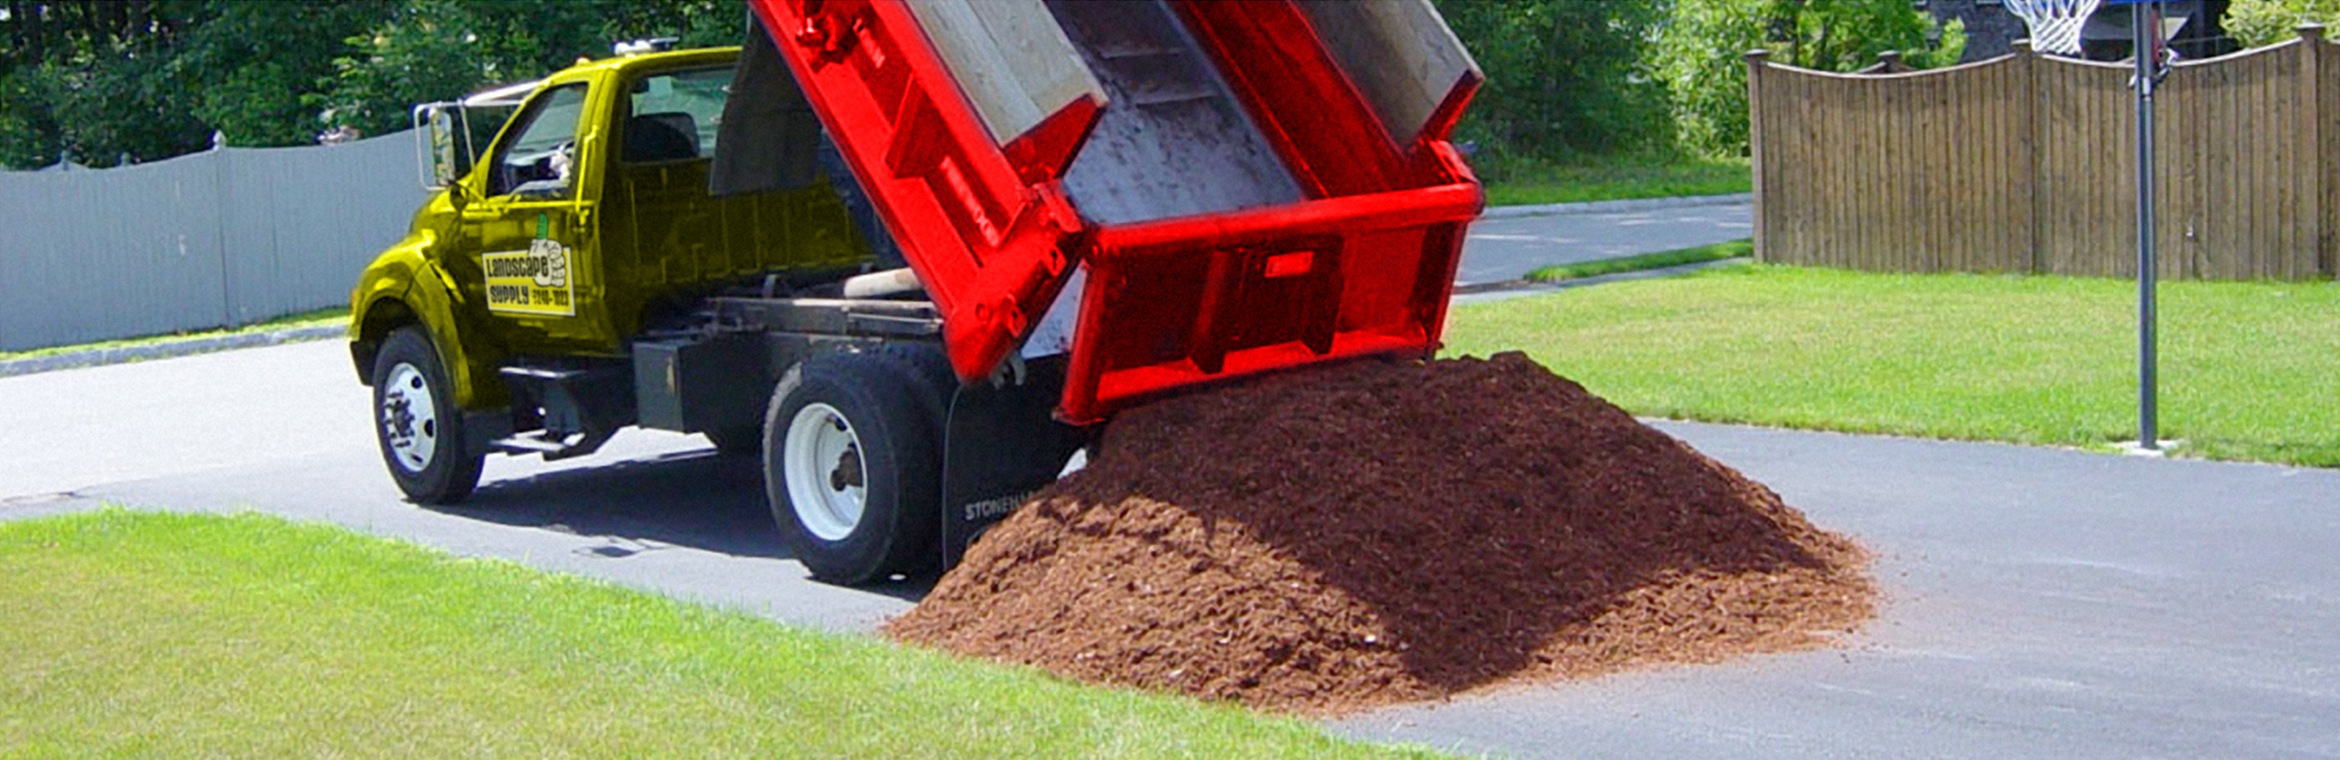 You can pick Mulch up at our retail location 7 days a week